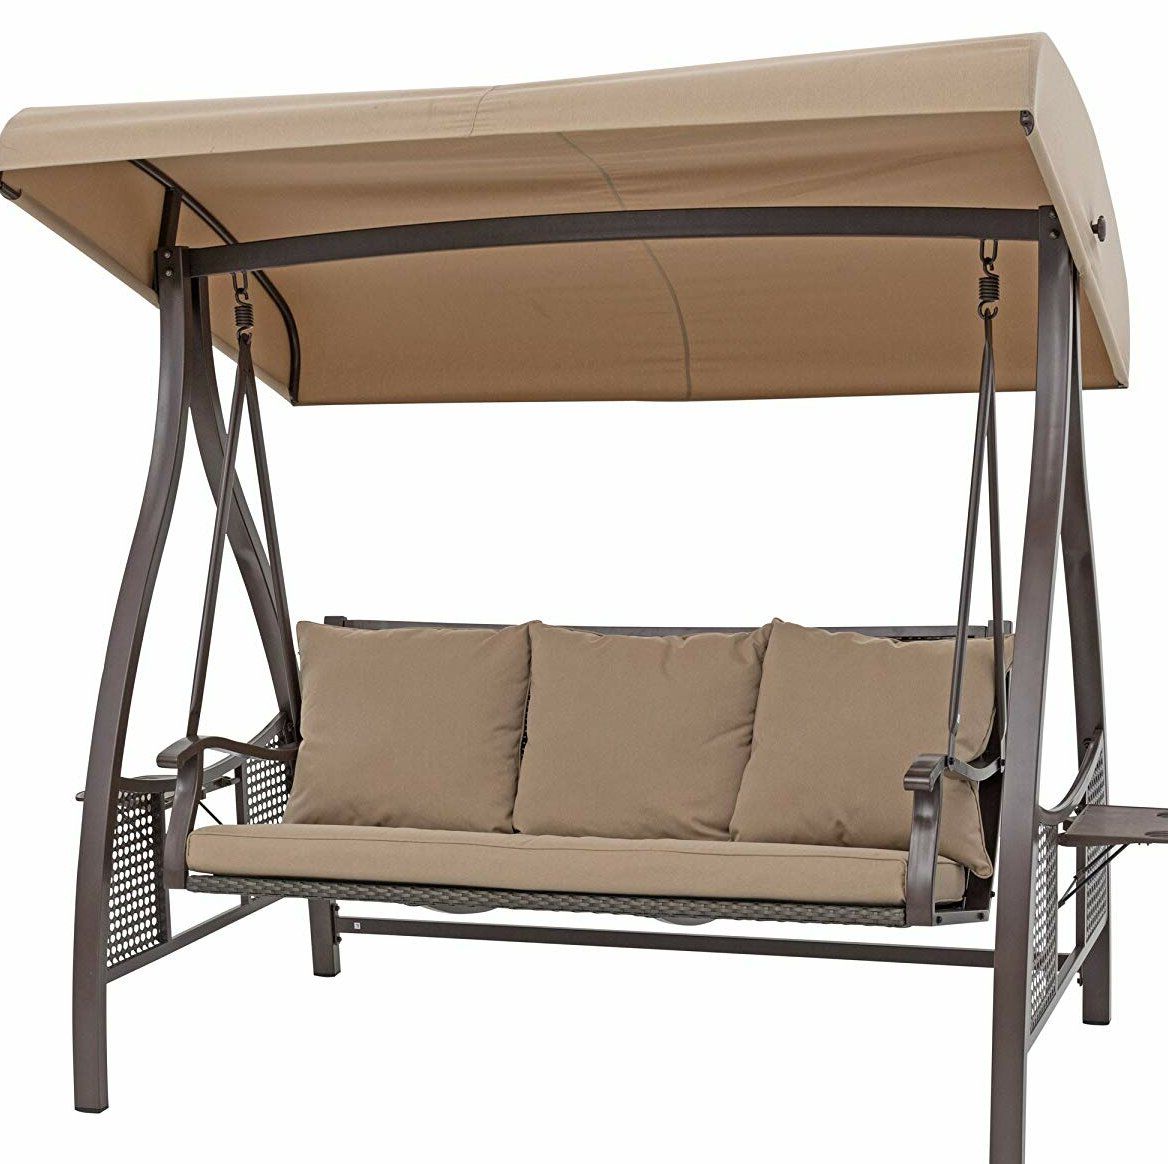 2019 Outdoor Canopy Hammock Porch Swings With Stand Inside Chenault Outdoor Canopy Hammock Porch Swing With Stand (View 5 of 30)